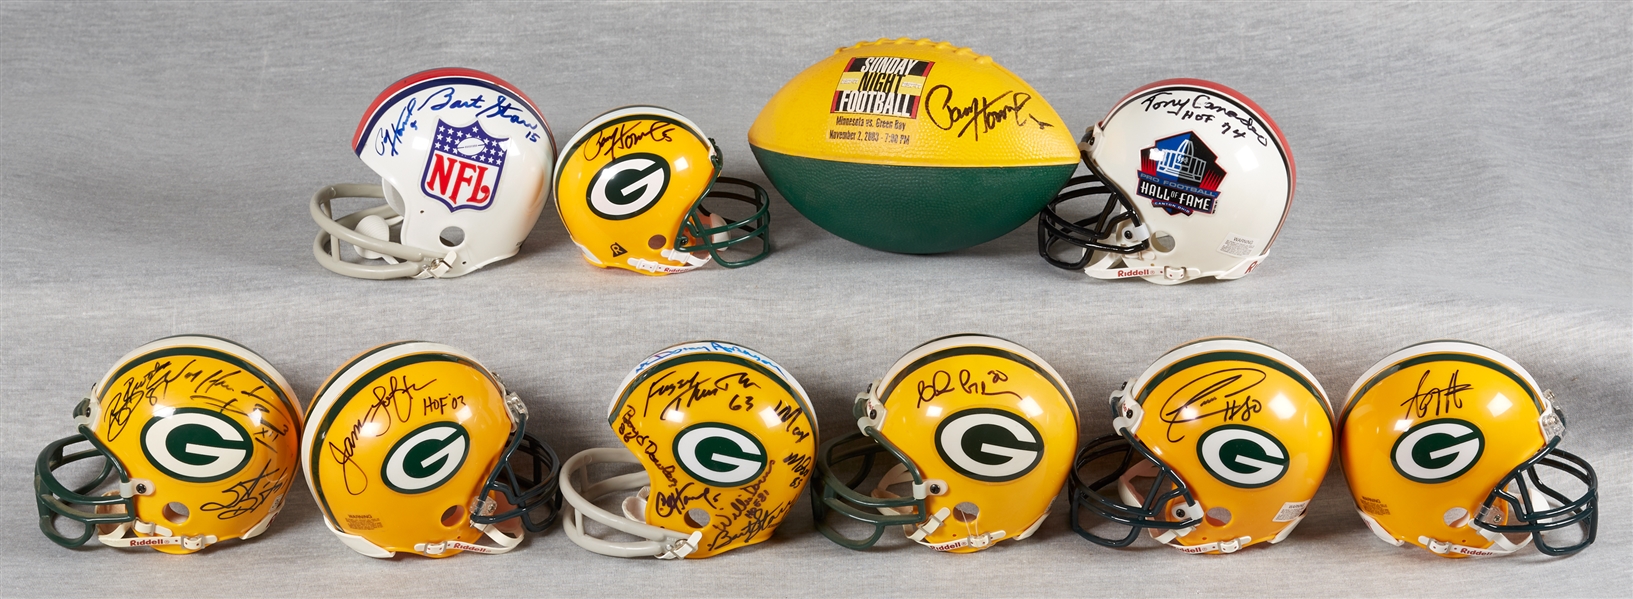 Packers Signed Mini-Helmet Group with Starr, Hornung, Canadeo (11)